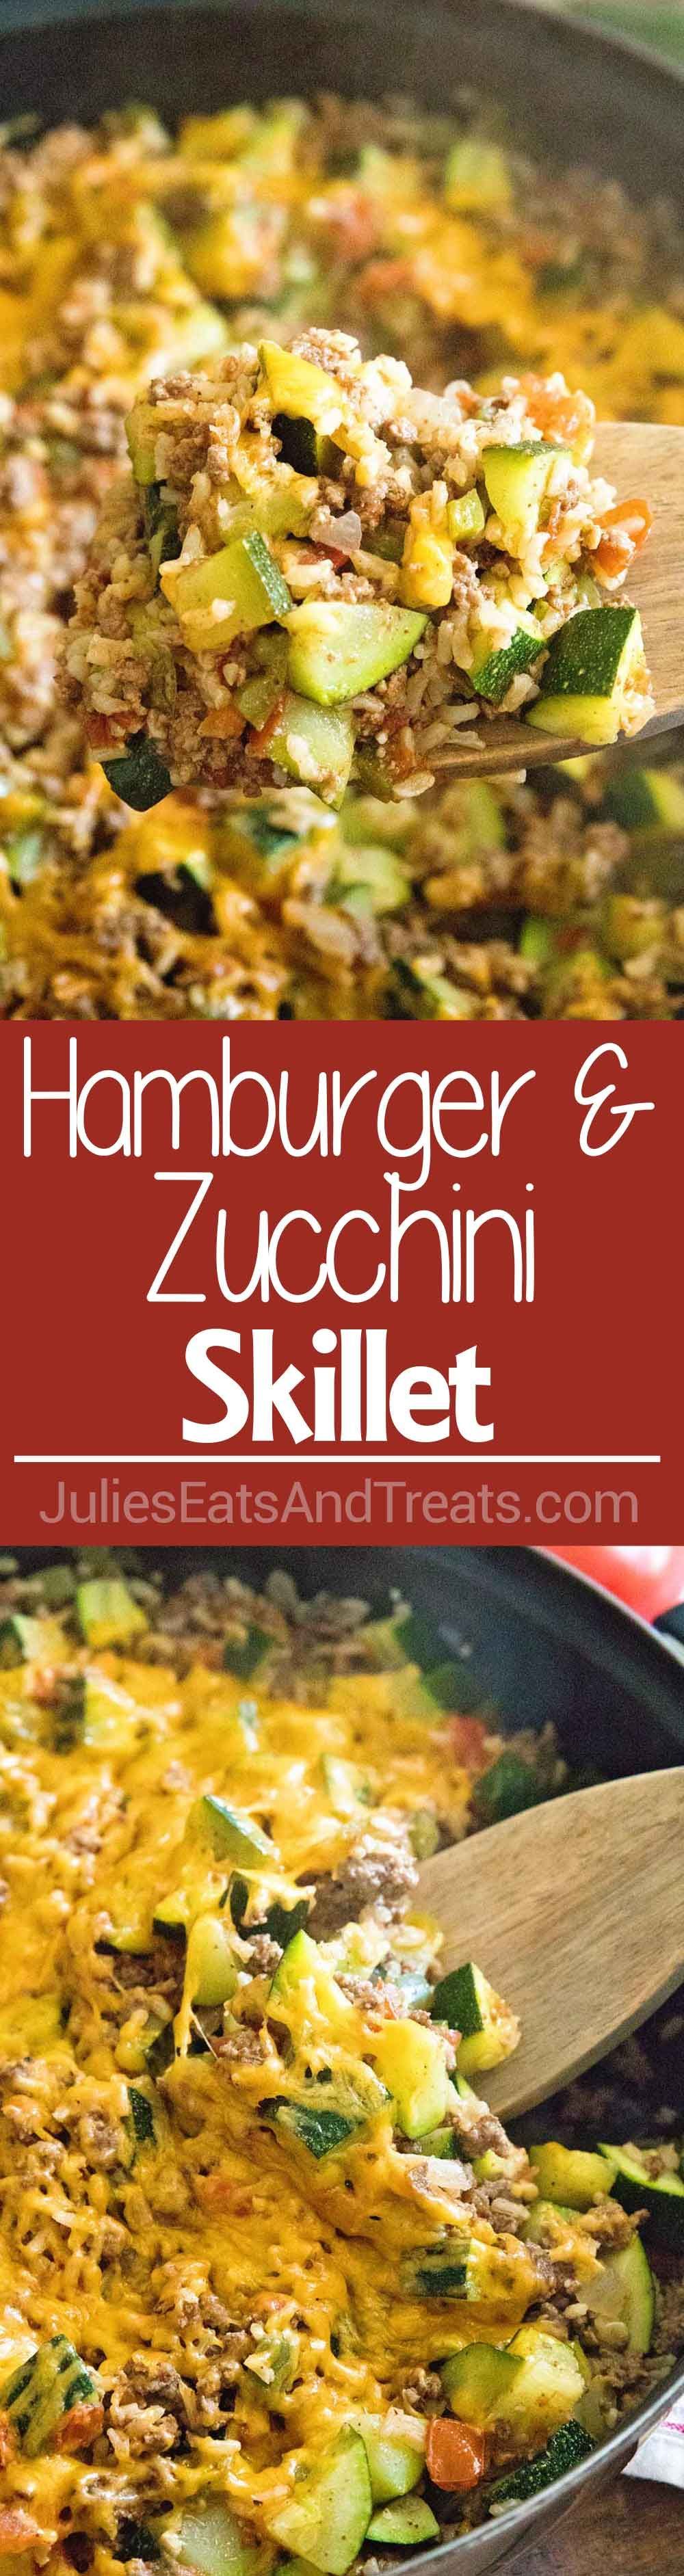 Hamburger and Zucchini Skillet ~ Delicious One Pan Dinner That is Light & Healthy! Loaded with Zucchini, Hamburger, Brown Rice,